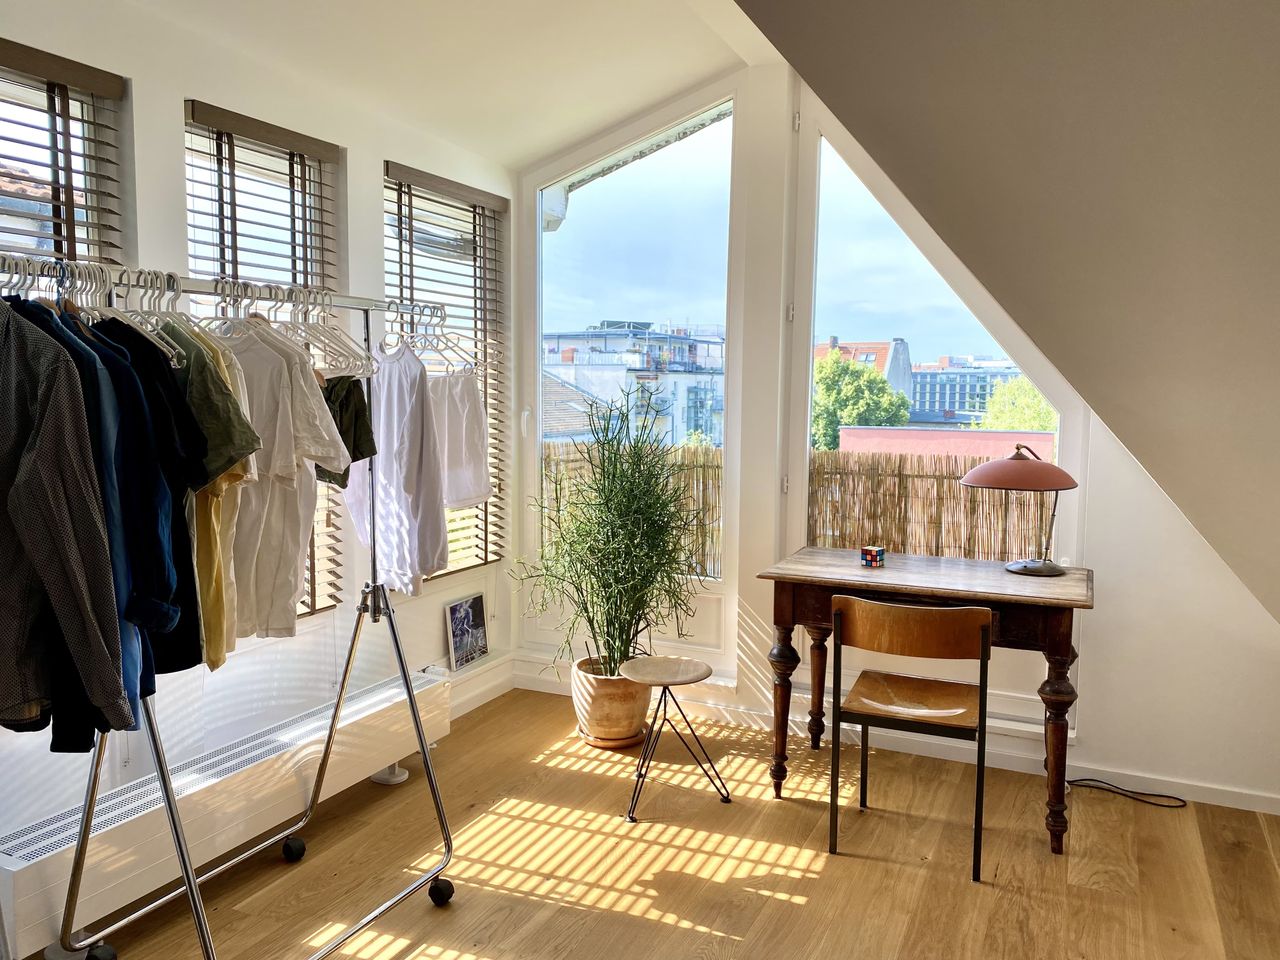 Fantastic 3-room attic apartment with sun terrace and view over Berlin